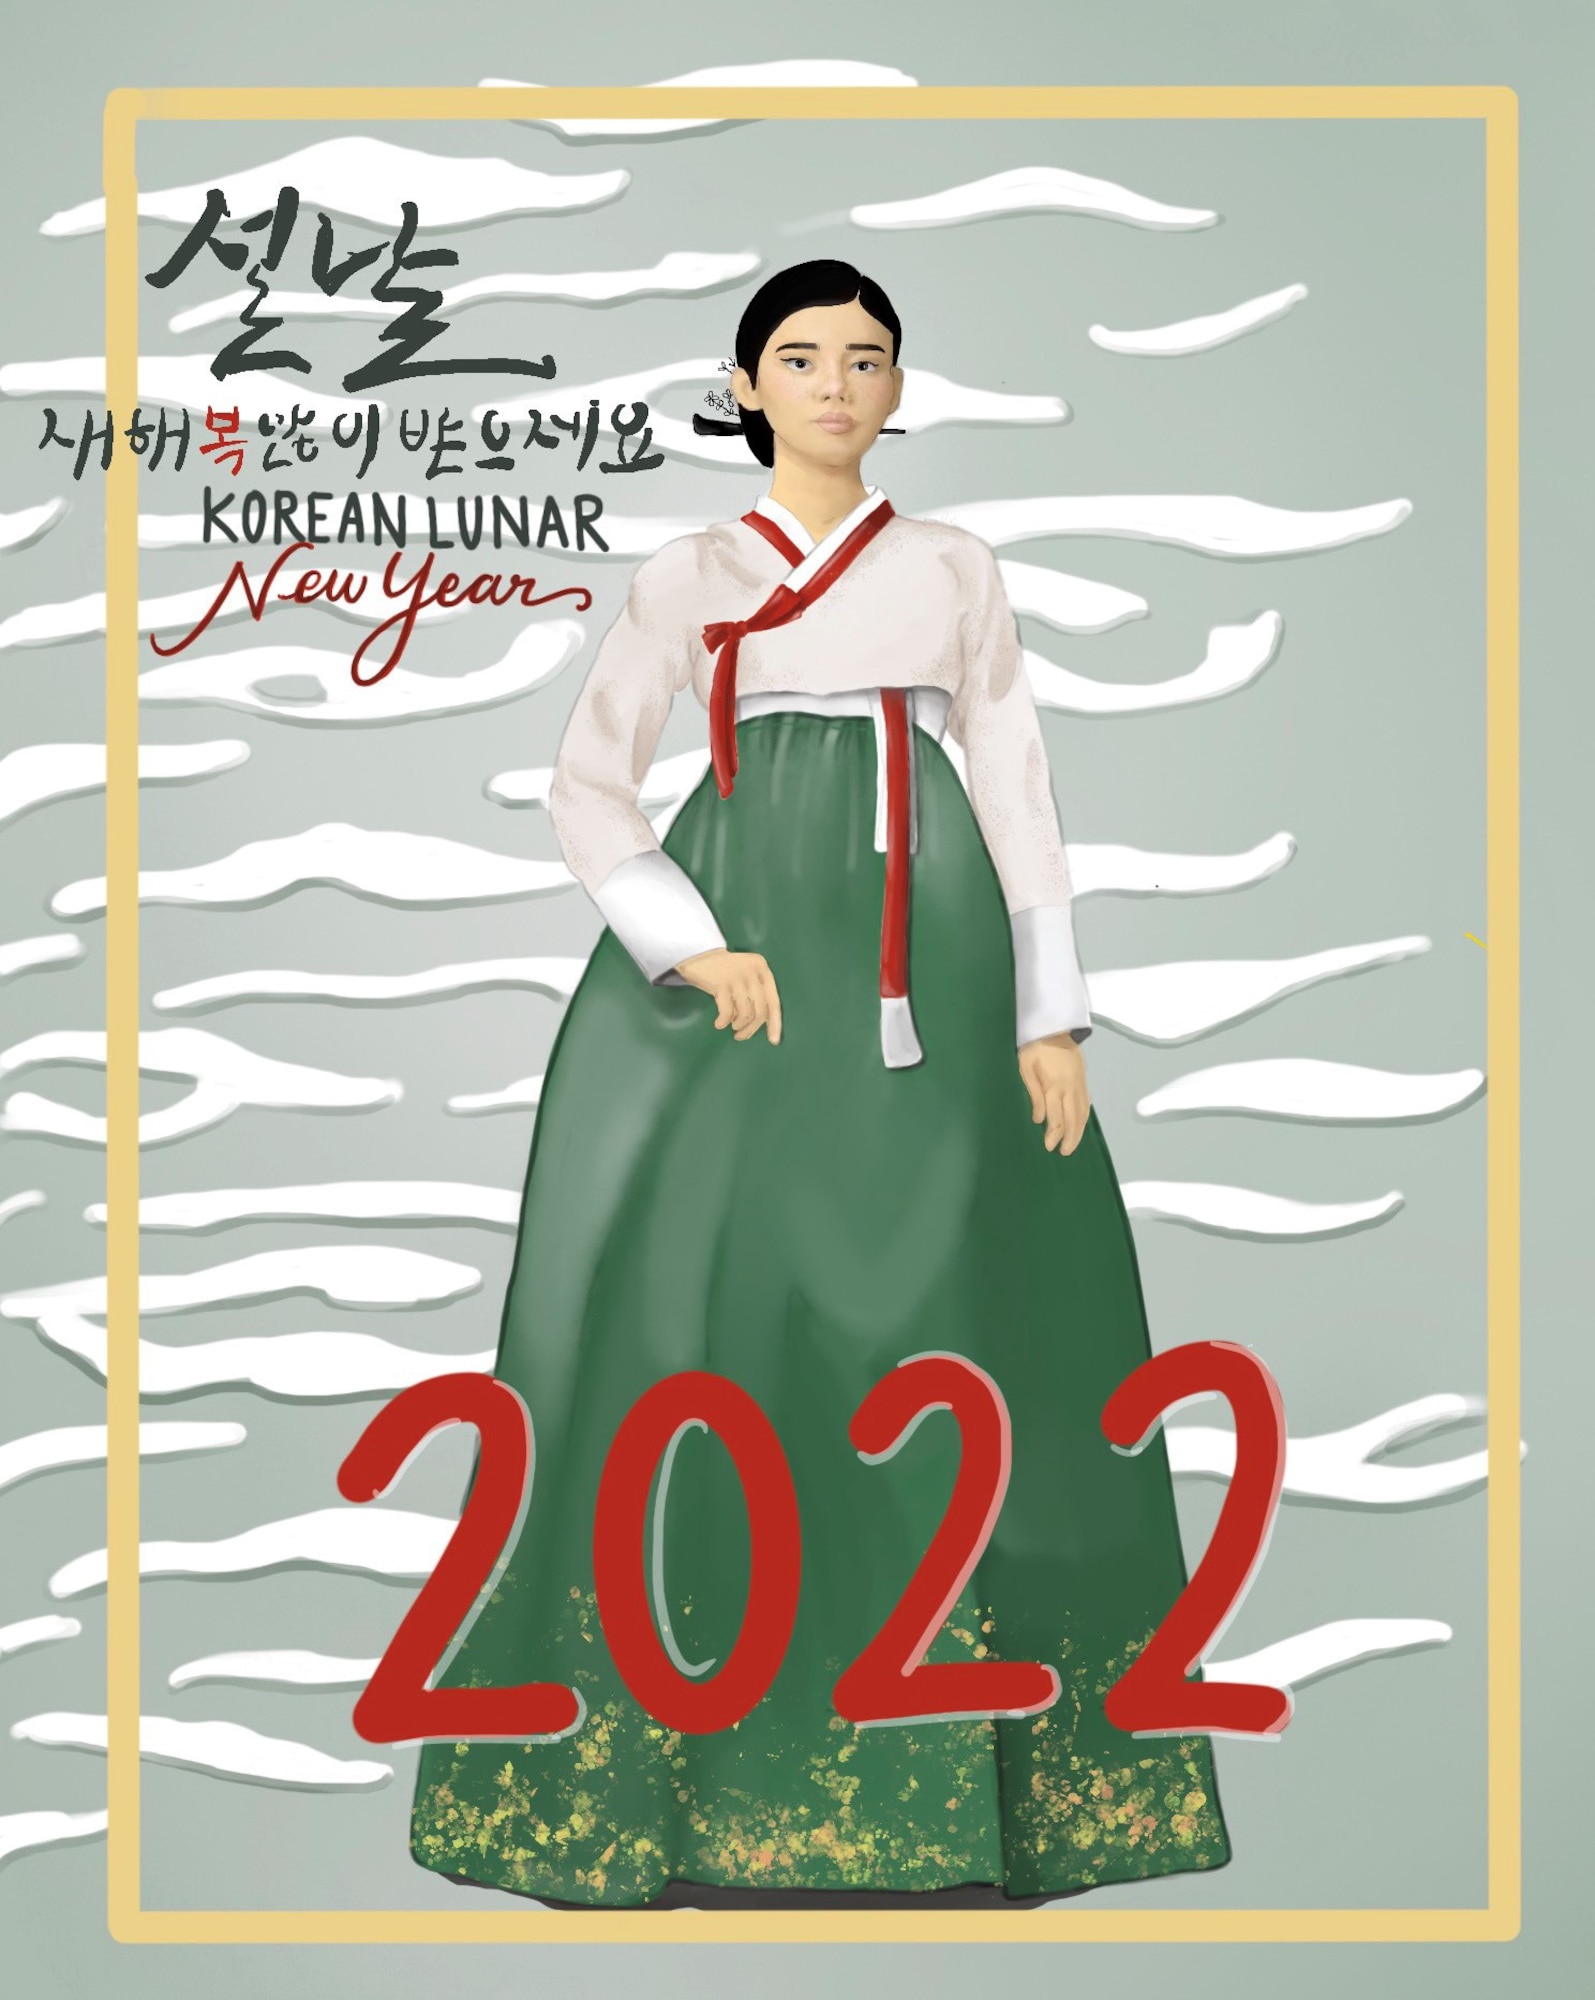 In South Korea, one of the most important holidays is Lunar New Years. It is known as Seollal in Korea, marking the first day of Korea Lunar Calendar that begins 1 February. Seollal is reserved for spending time with family, enjoying good food and playing traditional games. (U.S. Air Force graphic by Staff Sgt. Jesenia Landaverde)